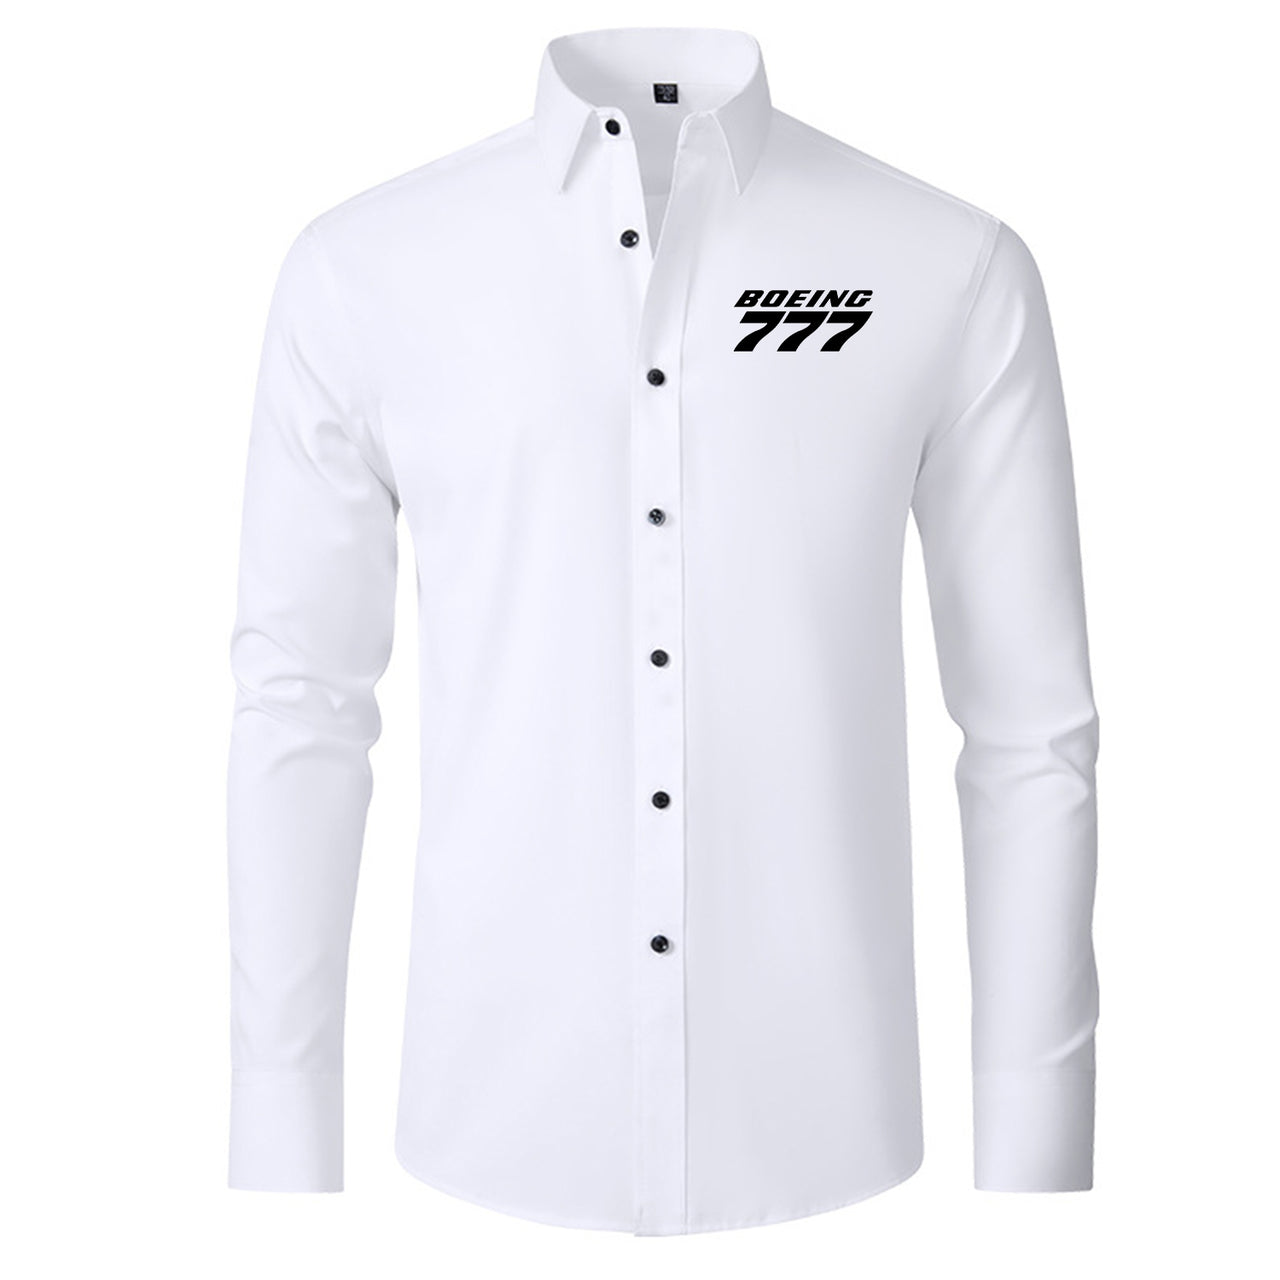 Boeing 777 & Text Designed Long Sleeve Shirts